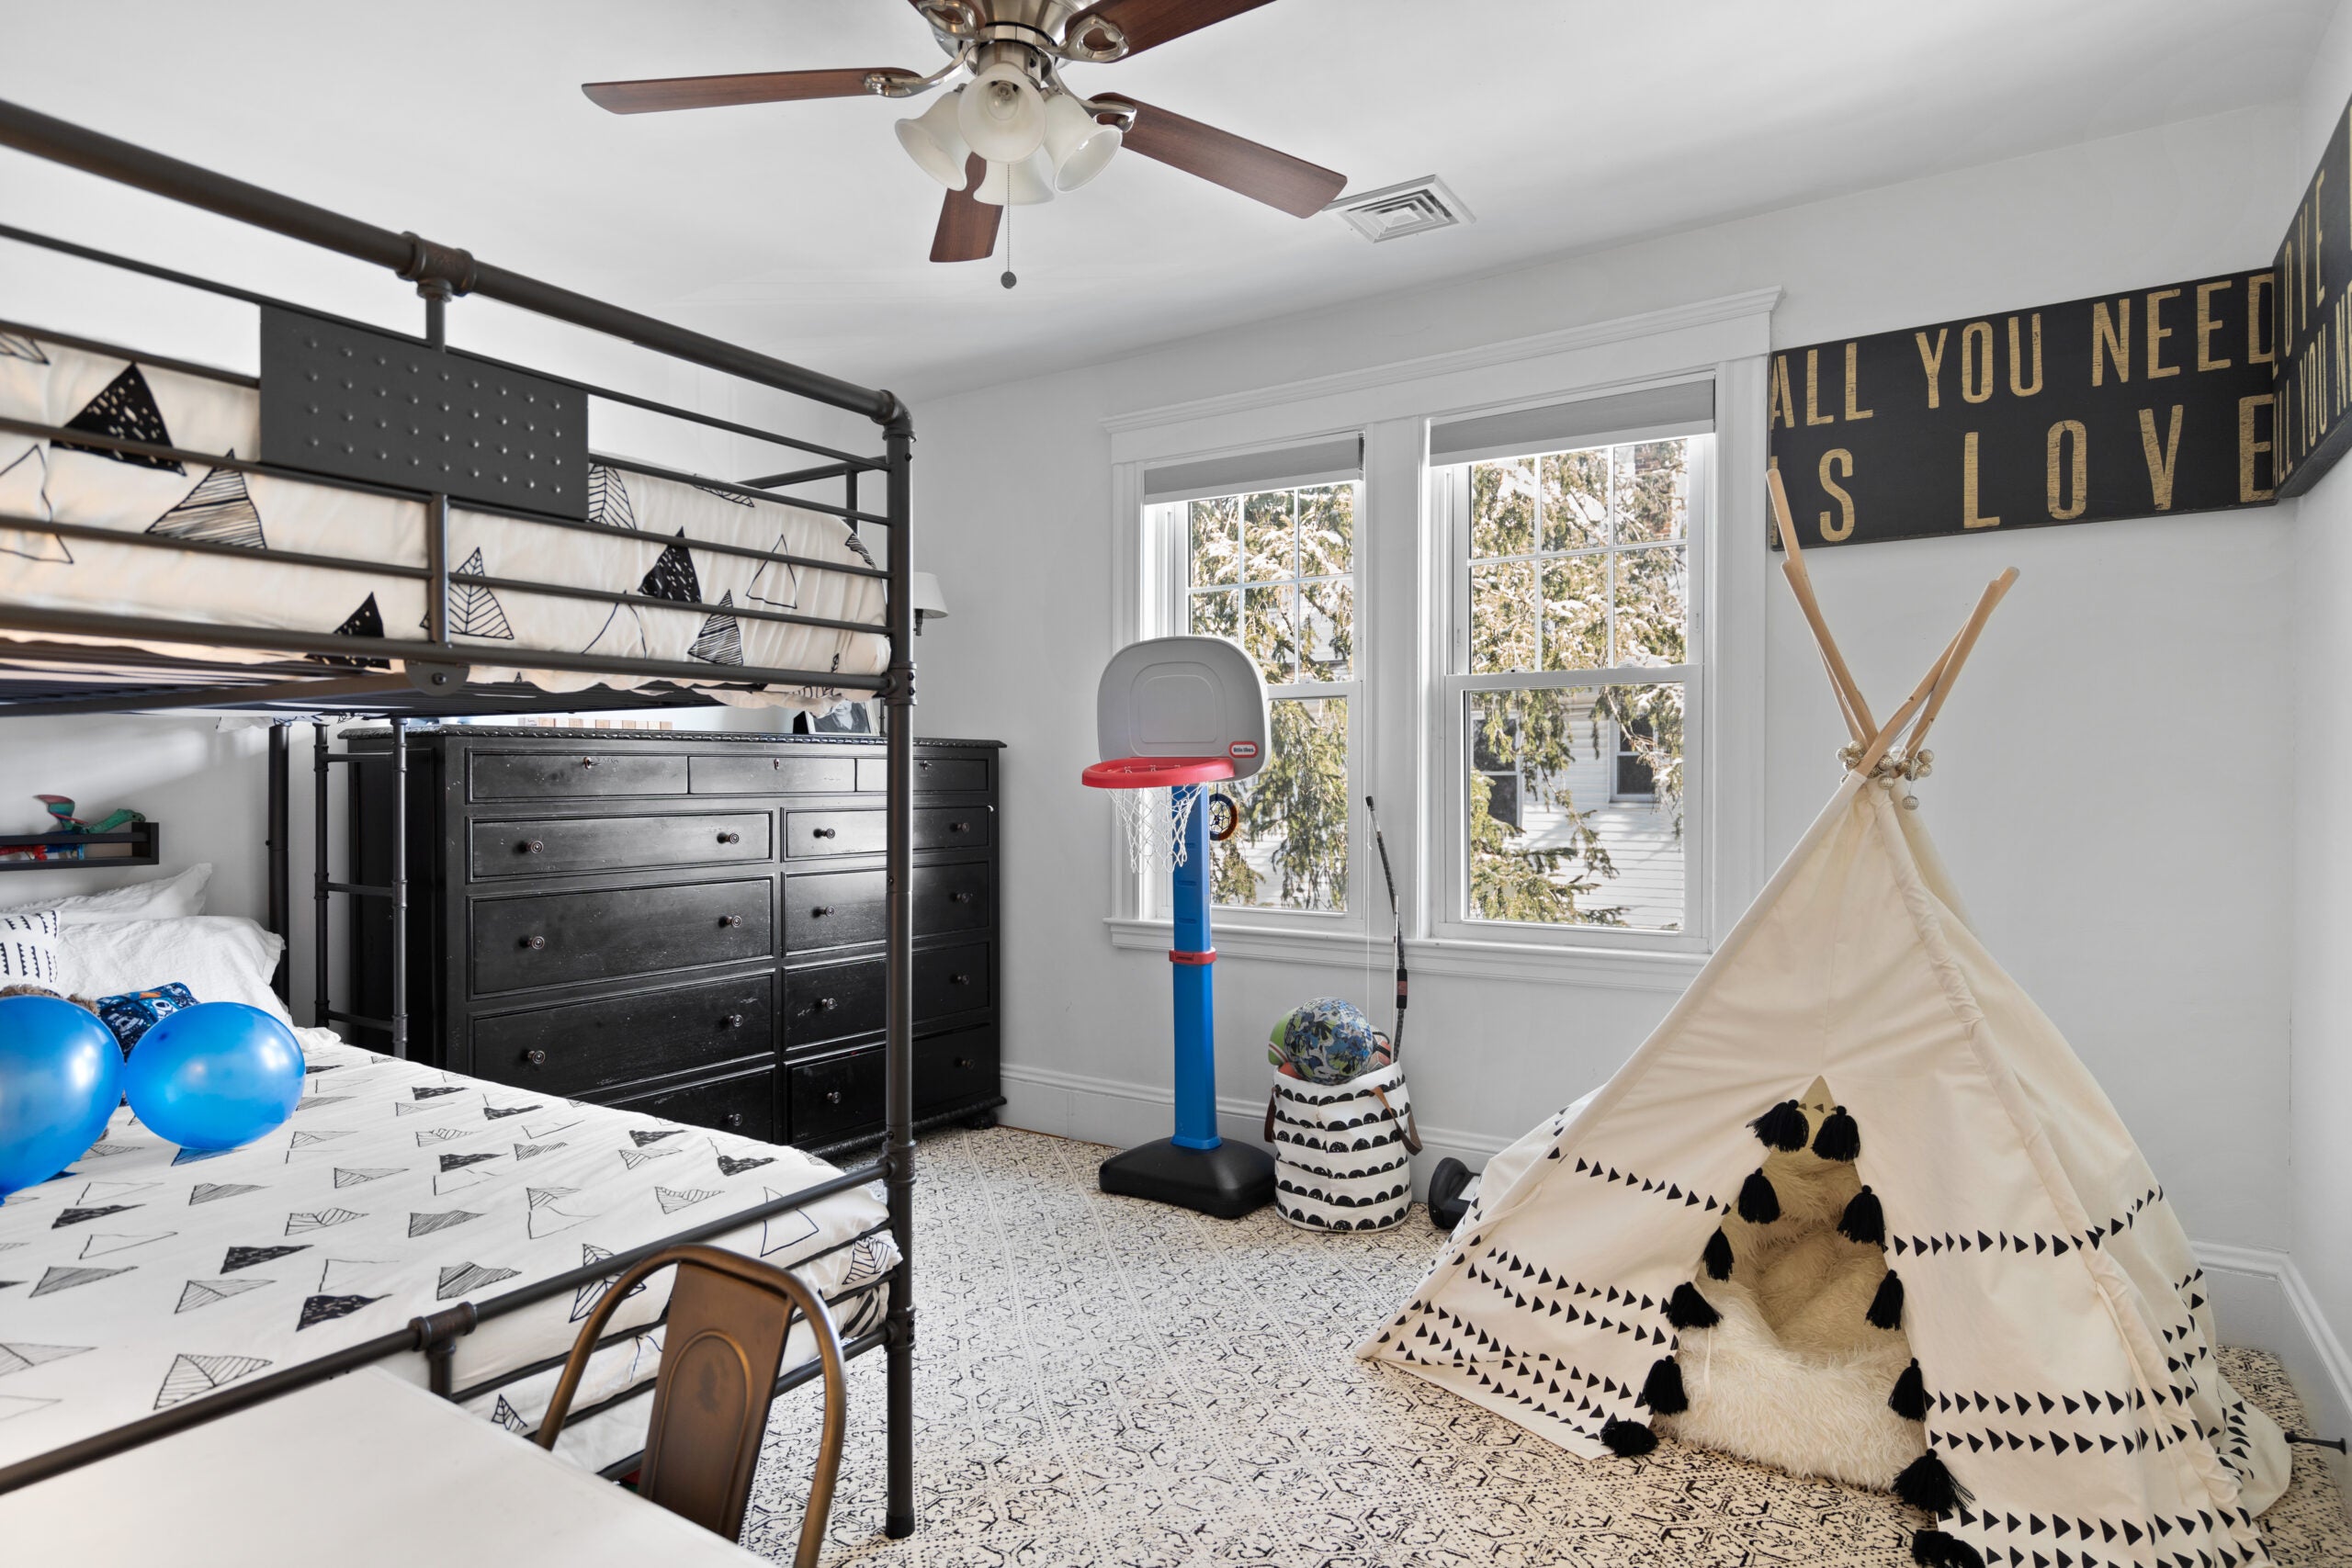 A child's bedroom with gray walls, white trim, a teepee, a sign that reads "All you need is love" in gold allcaps on a black background, a ceiling fan, wood flooring, an area rug, a black dresser, and a blue plastic basketball hoop.